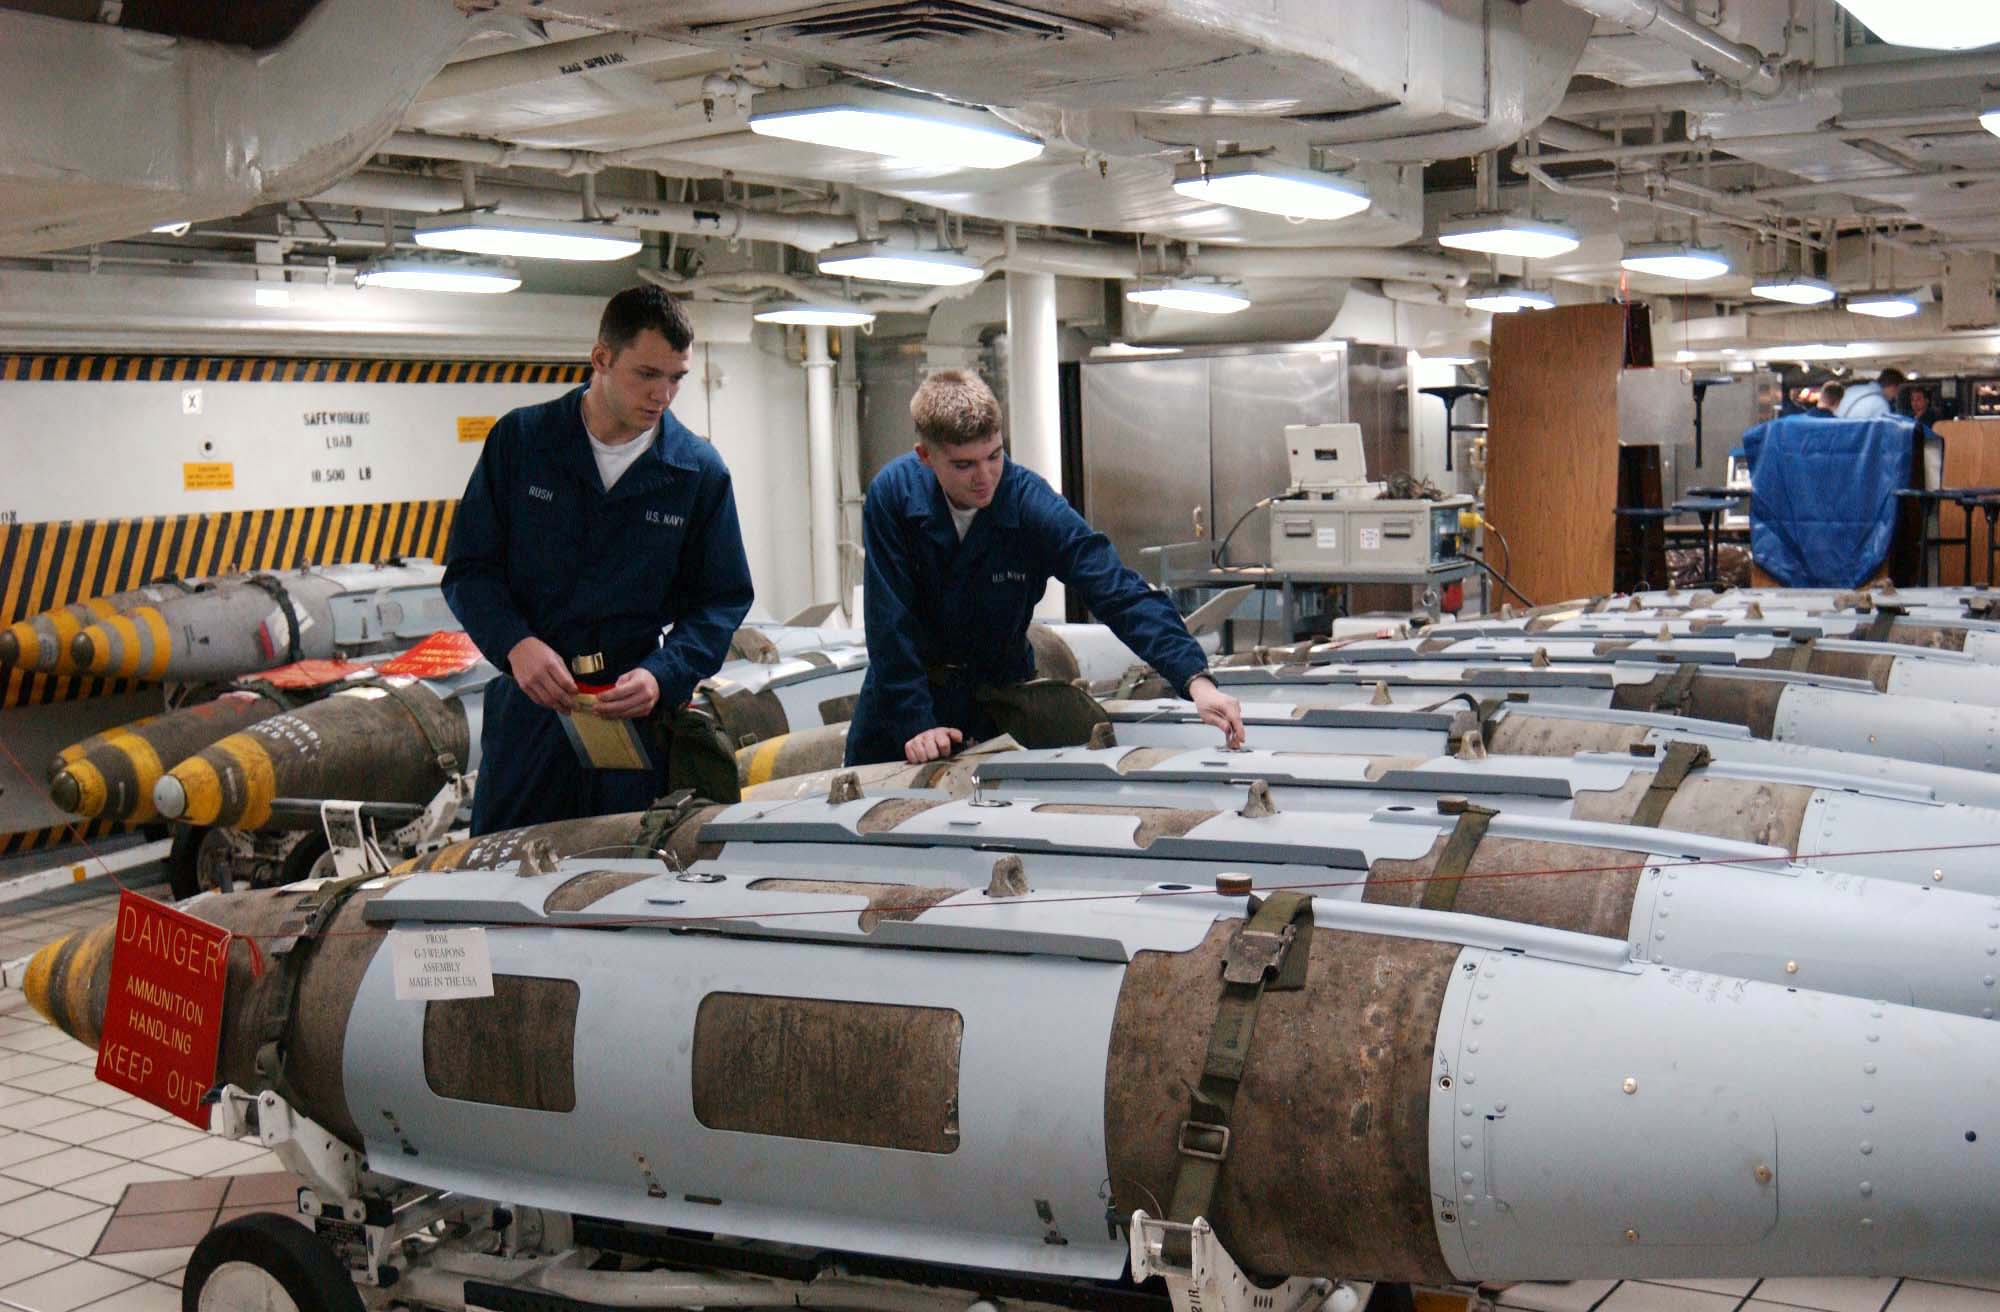 US_Navy_030320-N-5292M-007_Aviation_Ordnancemen_inspect_a_Joint_Direct_Attack_Munition_(JDAM)_GBU-31_in_preparation_for_loading_on_air_wing_aircraft.jpg